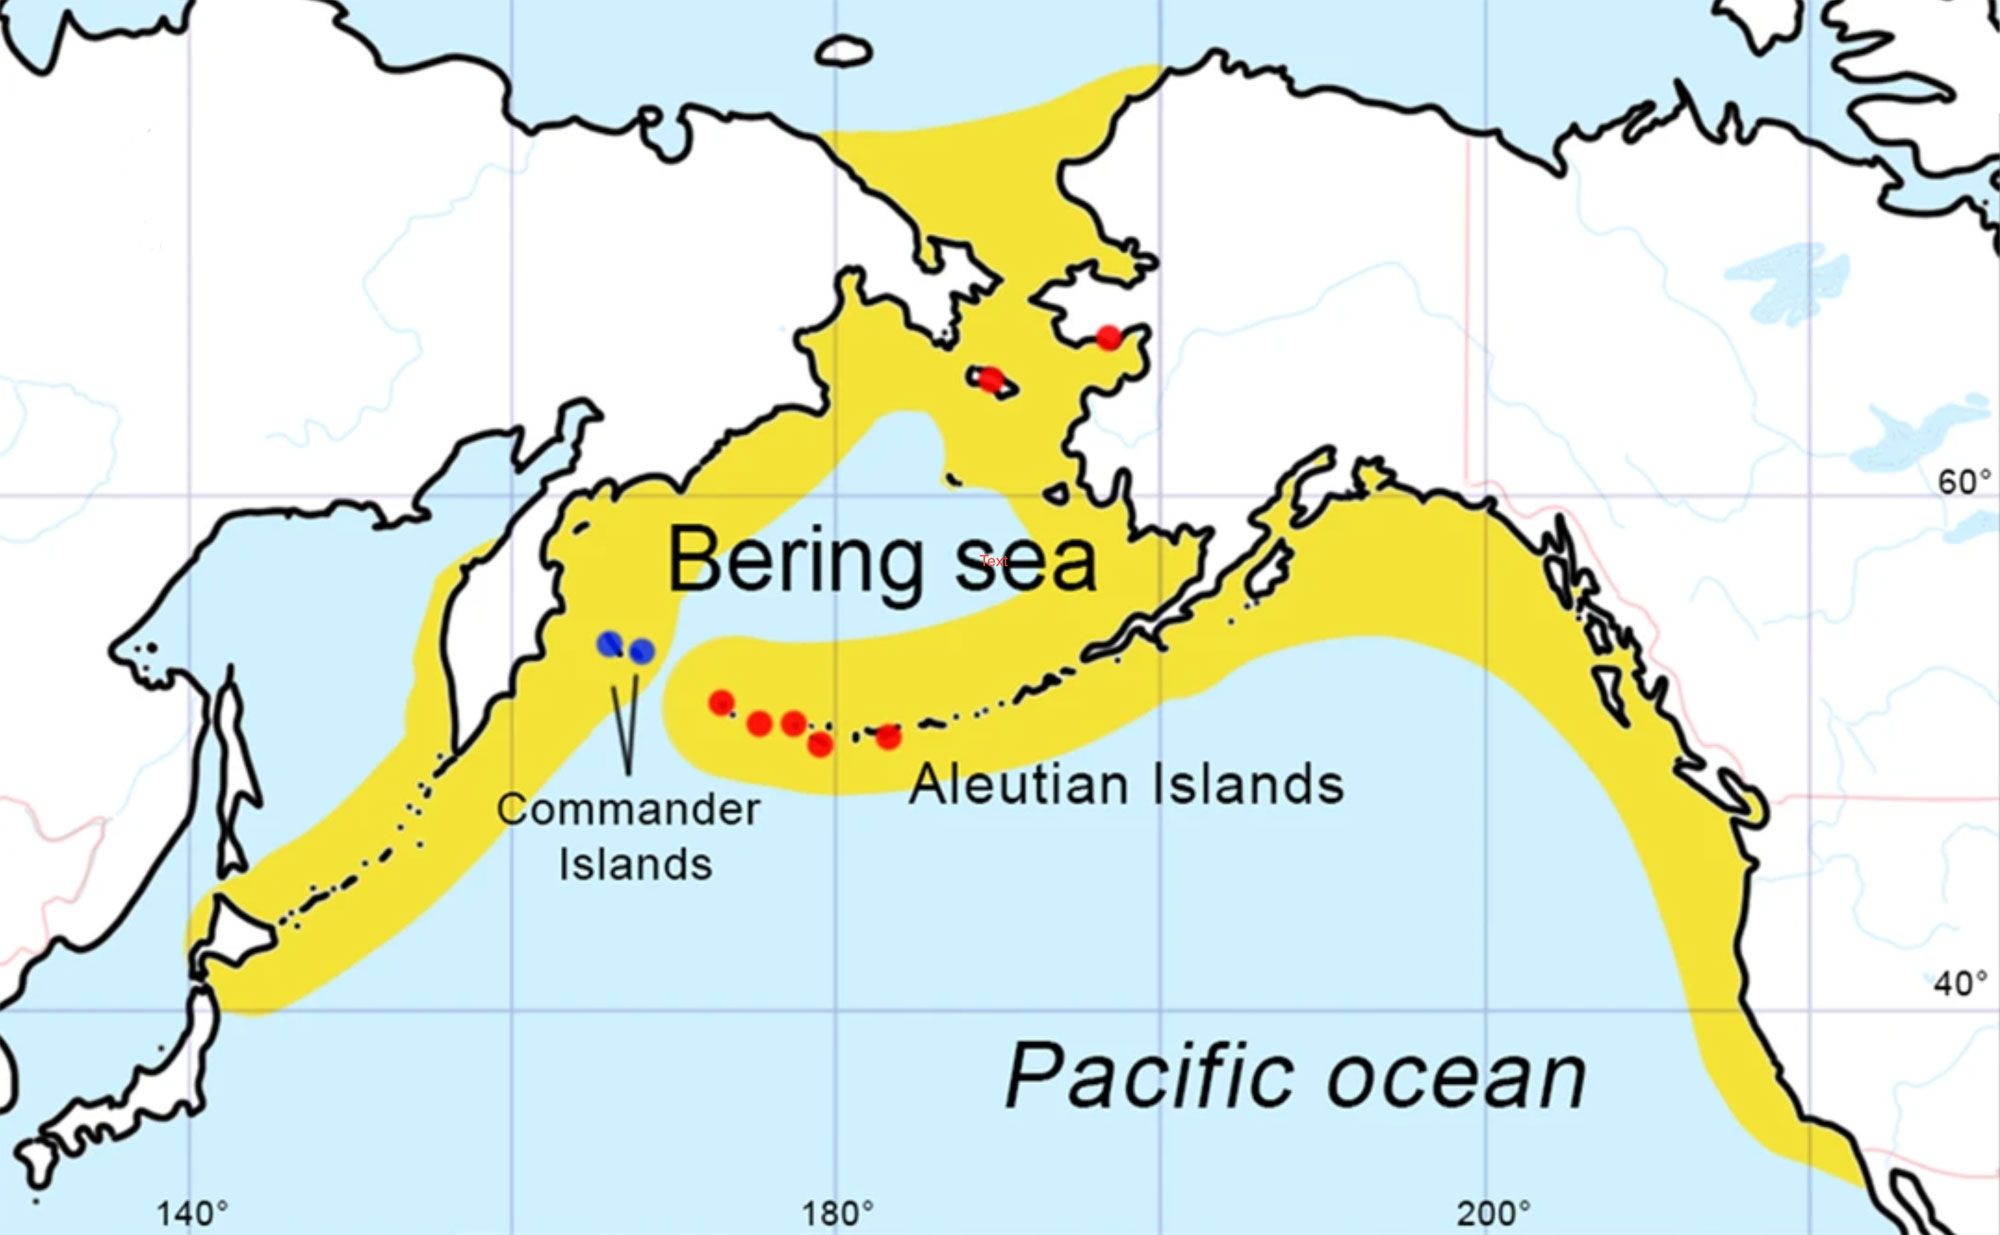 Map showing the range of the Steller's sea cow. The map shows the northern Pacific Ocean with eastern Asia on the left and western North America on the right. A region extending from Hokkaido Island (Japan) to northeastern Russia to northwestern Alaska, the Aleutian Islands, and south to Baja California is shaded yellow, indicating the Pleistocene range of Steller's sea cow. Red dots in the eastern Aleutian Islands, St. Lawrence Island, and west-central Alaska indicate archeological sites with sea cow remains. Blue dots on the Commander Islands show the range of the Steller's sea cow as of the 1700s, prior to extinction.